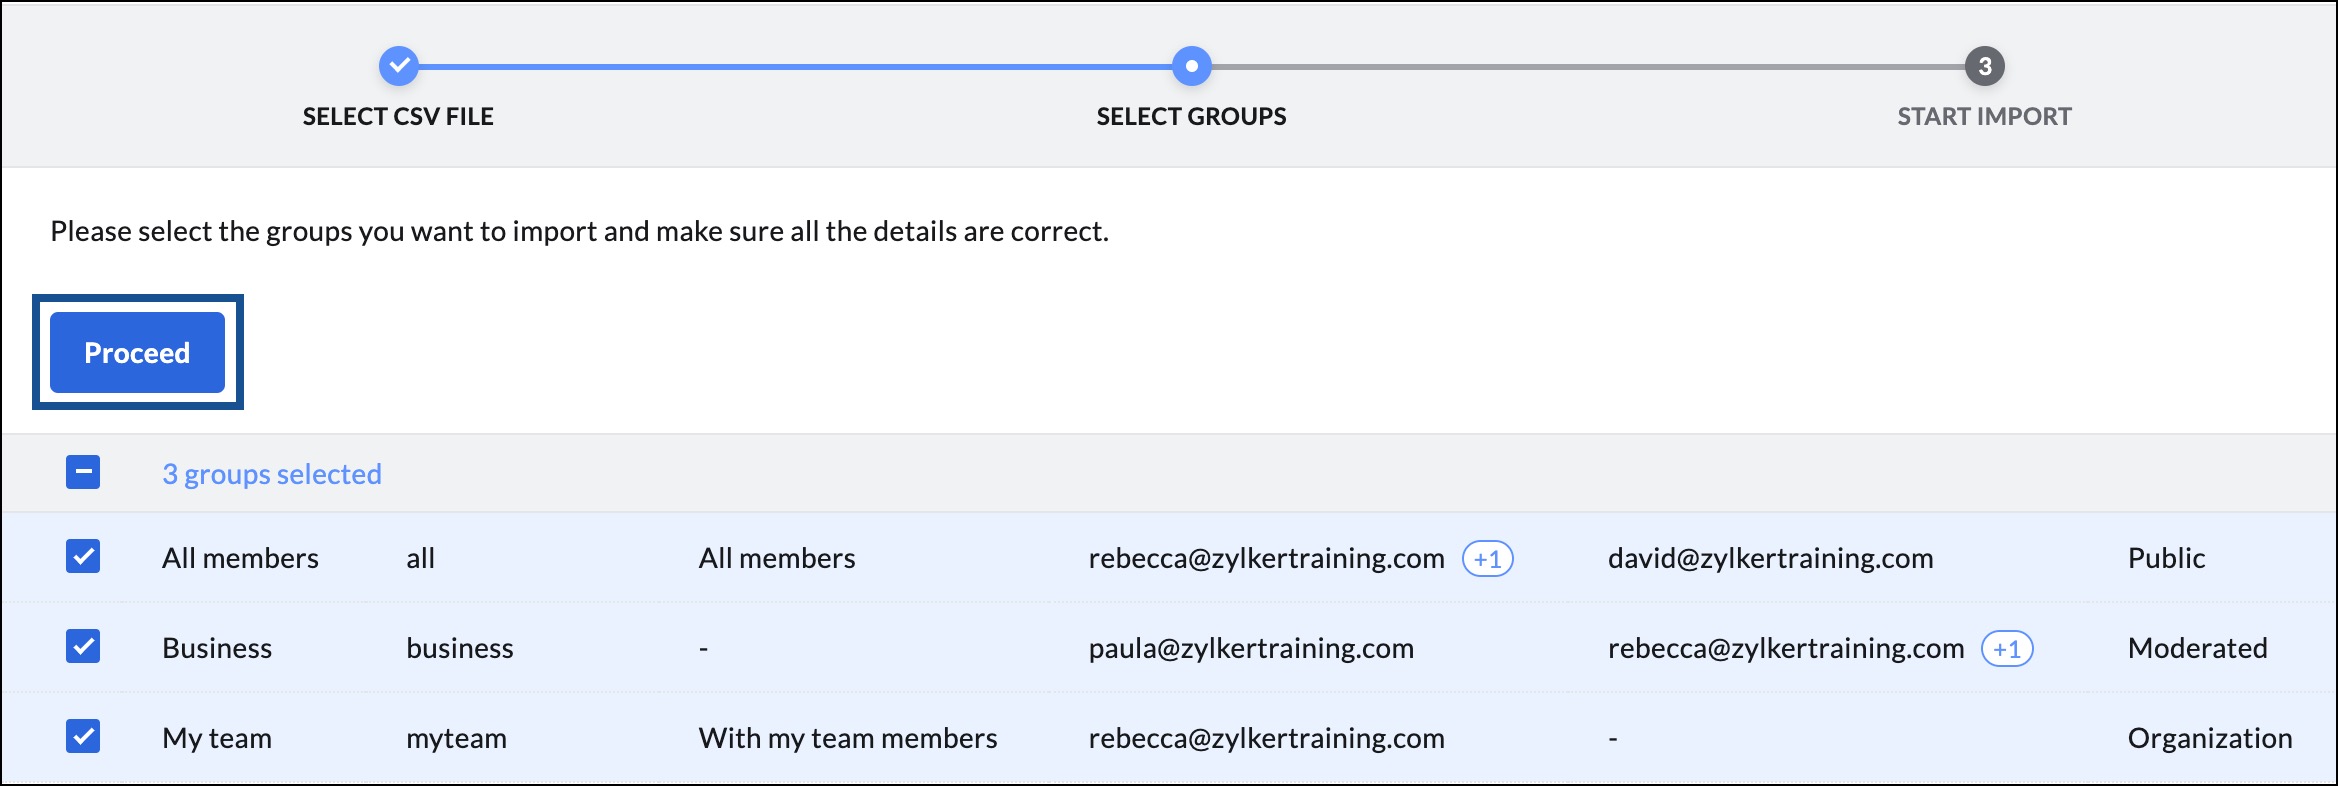 select groups from the CSV file